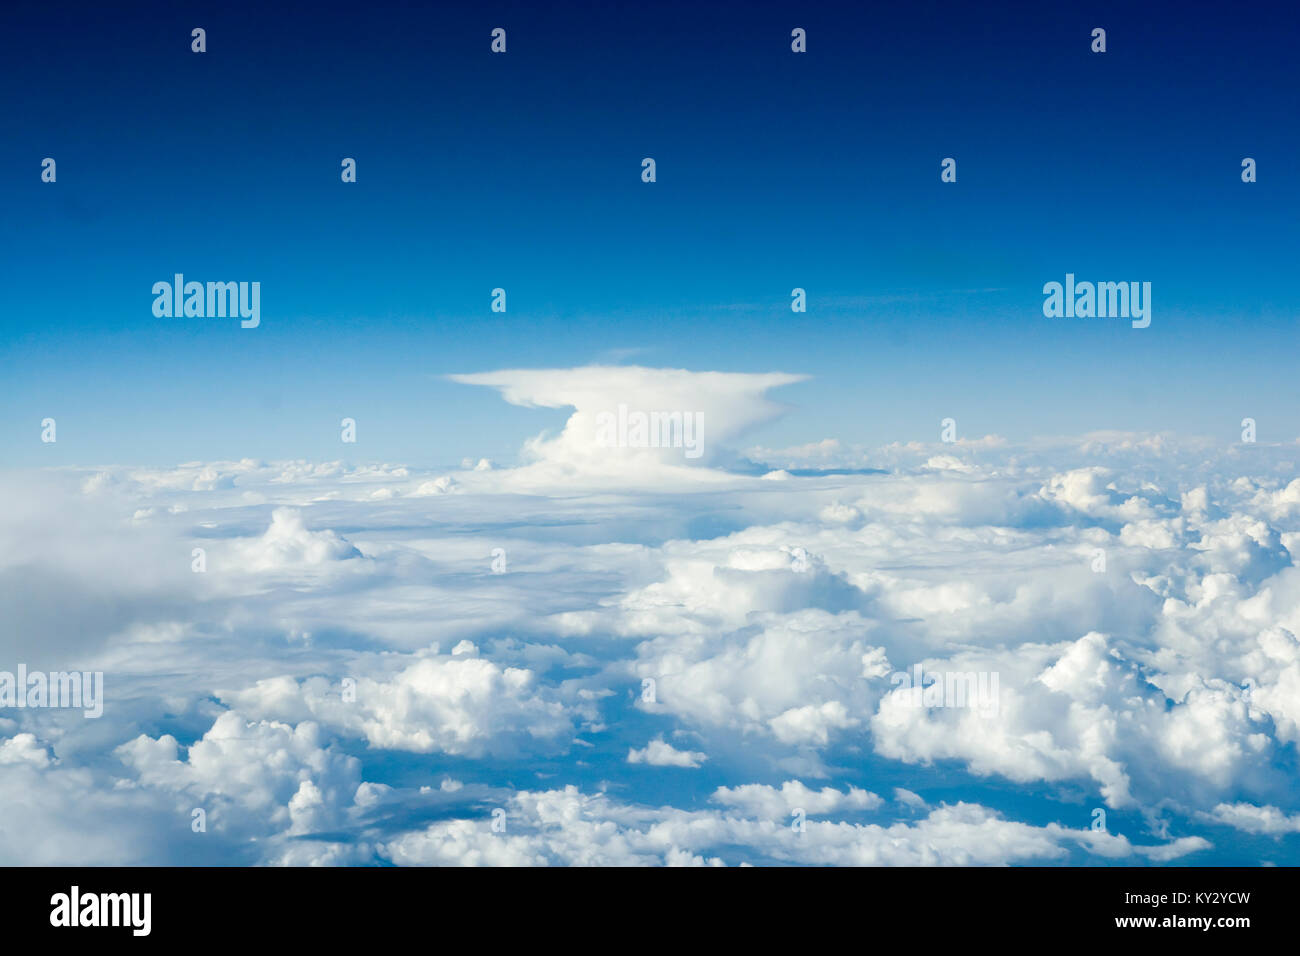 Africa, An Anvil Cloud Stock Photo